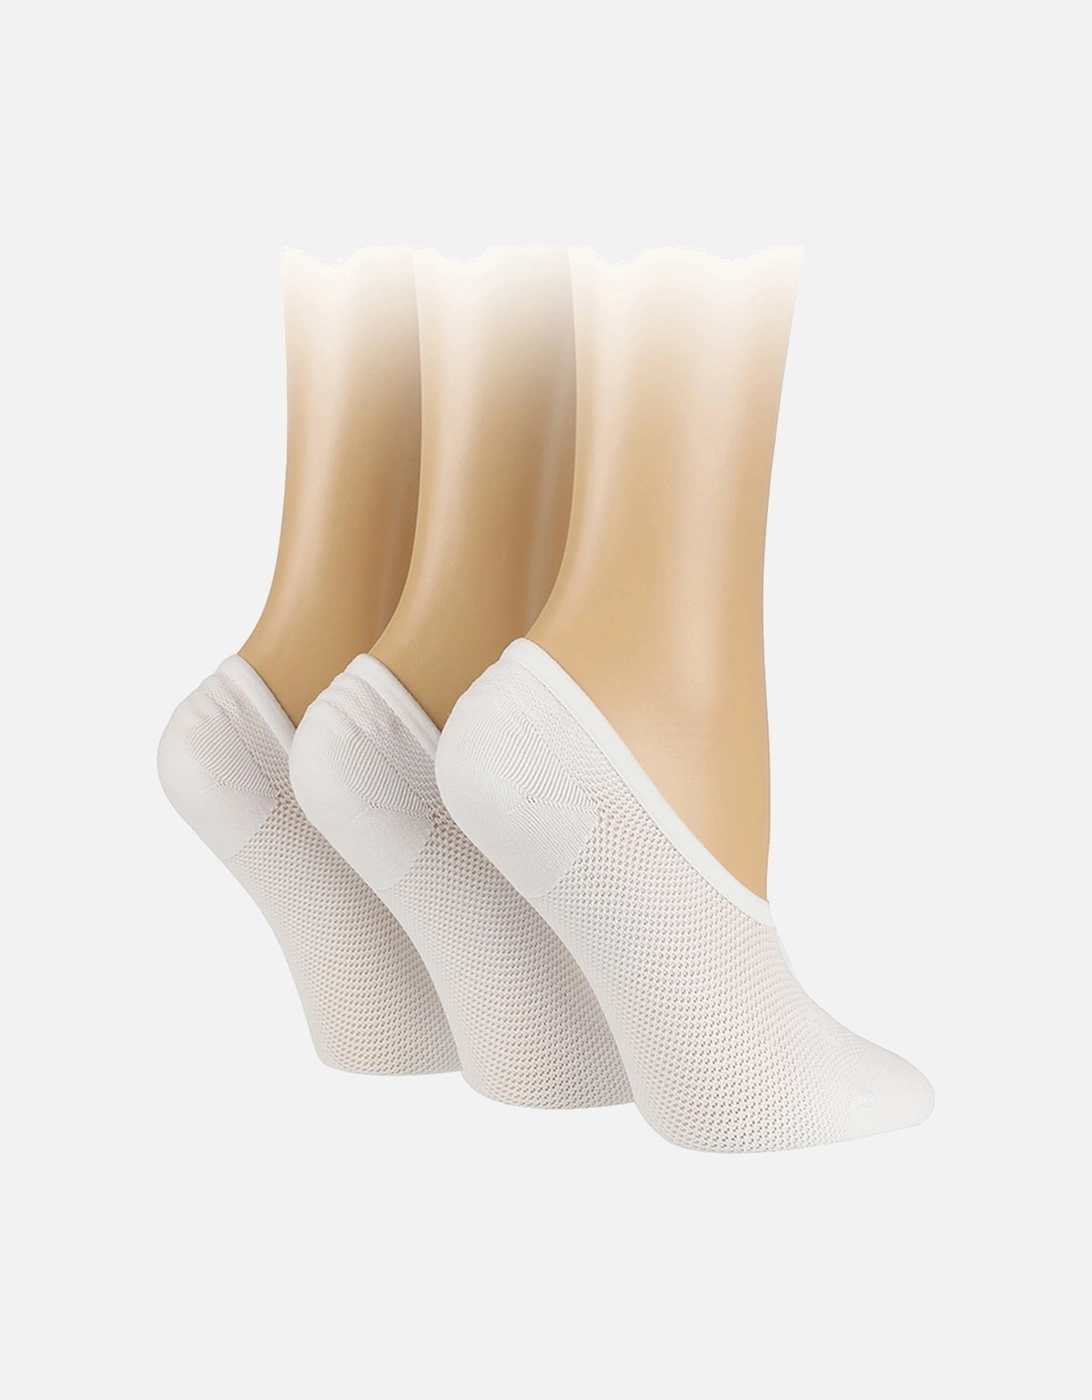 3 PAIR LADIES HIGH CUT PED SOCKS WITH SILICONE GRIP, 2 of 1